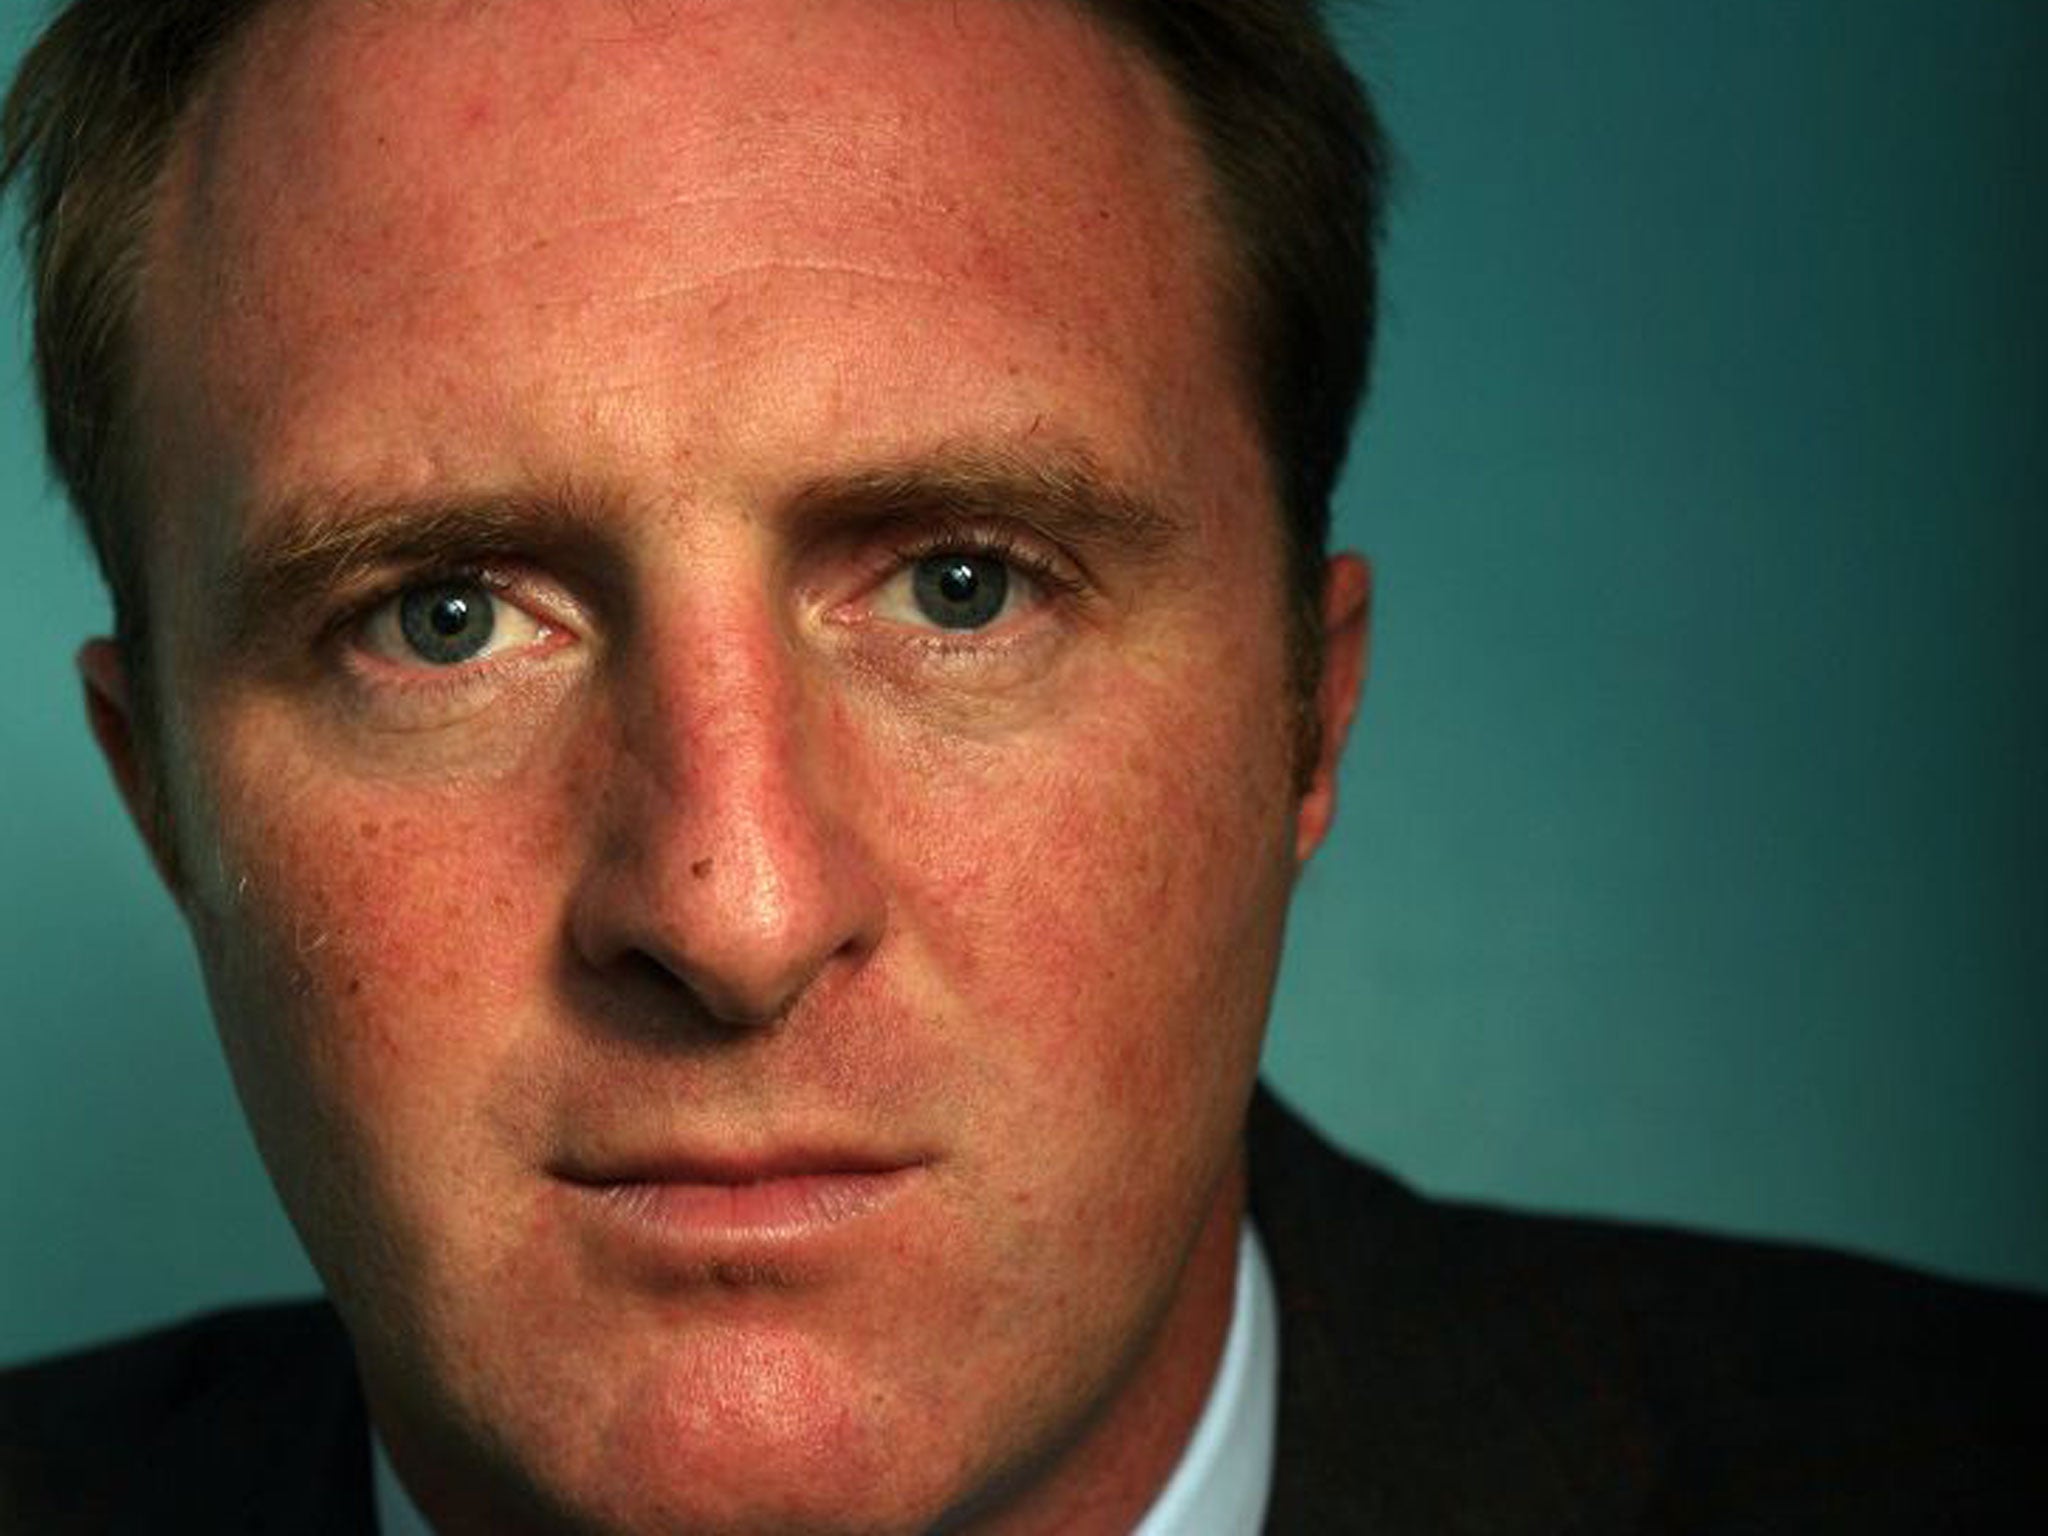 James Harding is set to be announced as the next Director of BBC News